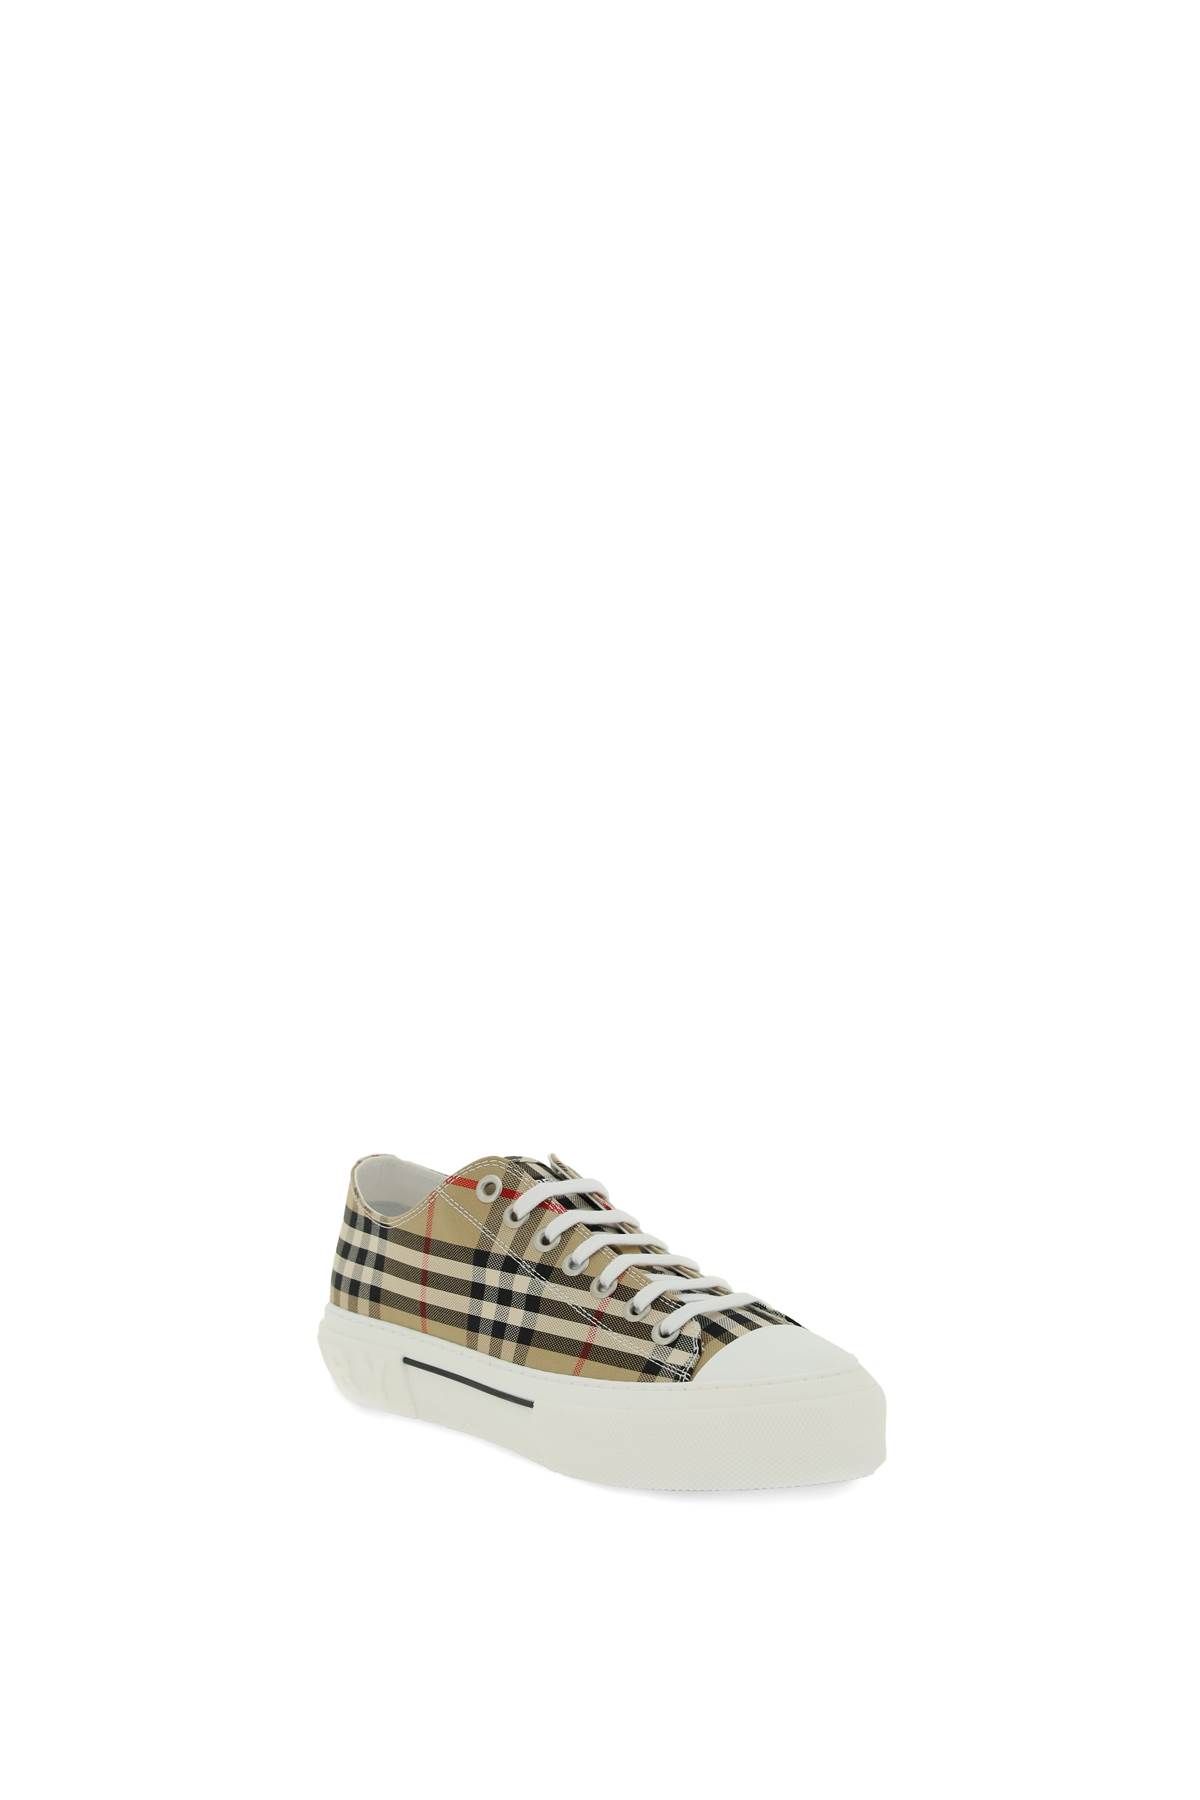 Shop Burberry Vintage Check Canvas Sneakers In White,beige,black